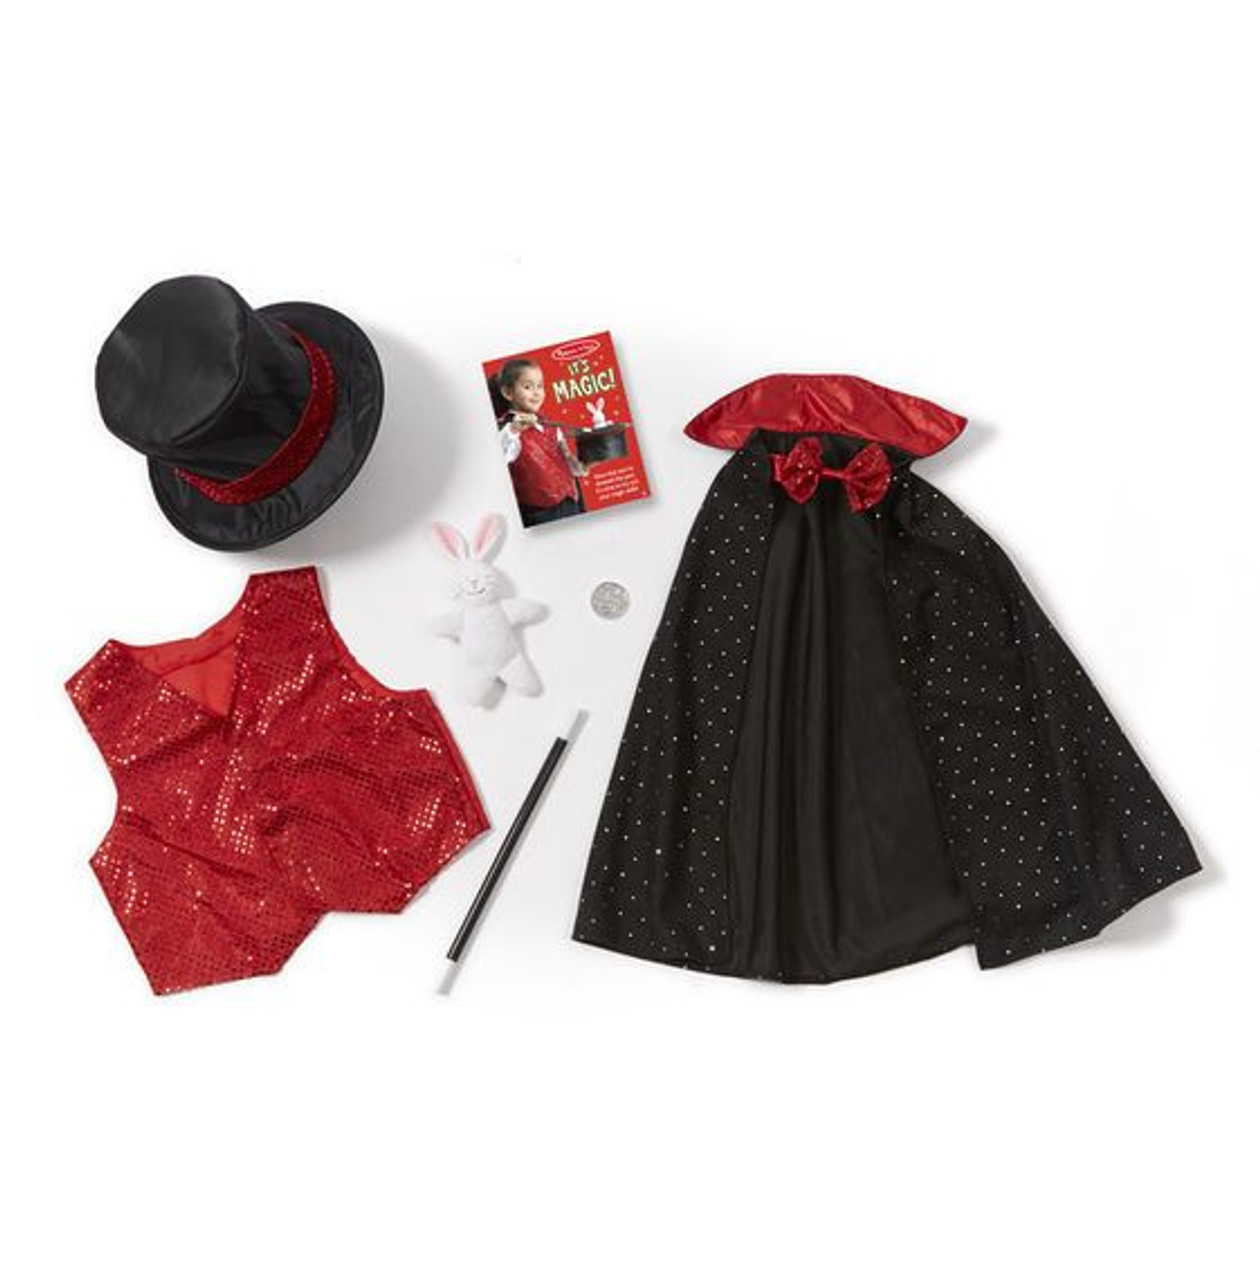 Personalized Magician Costume Set - inset